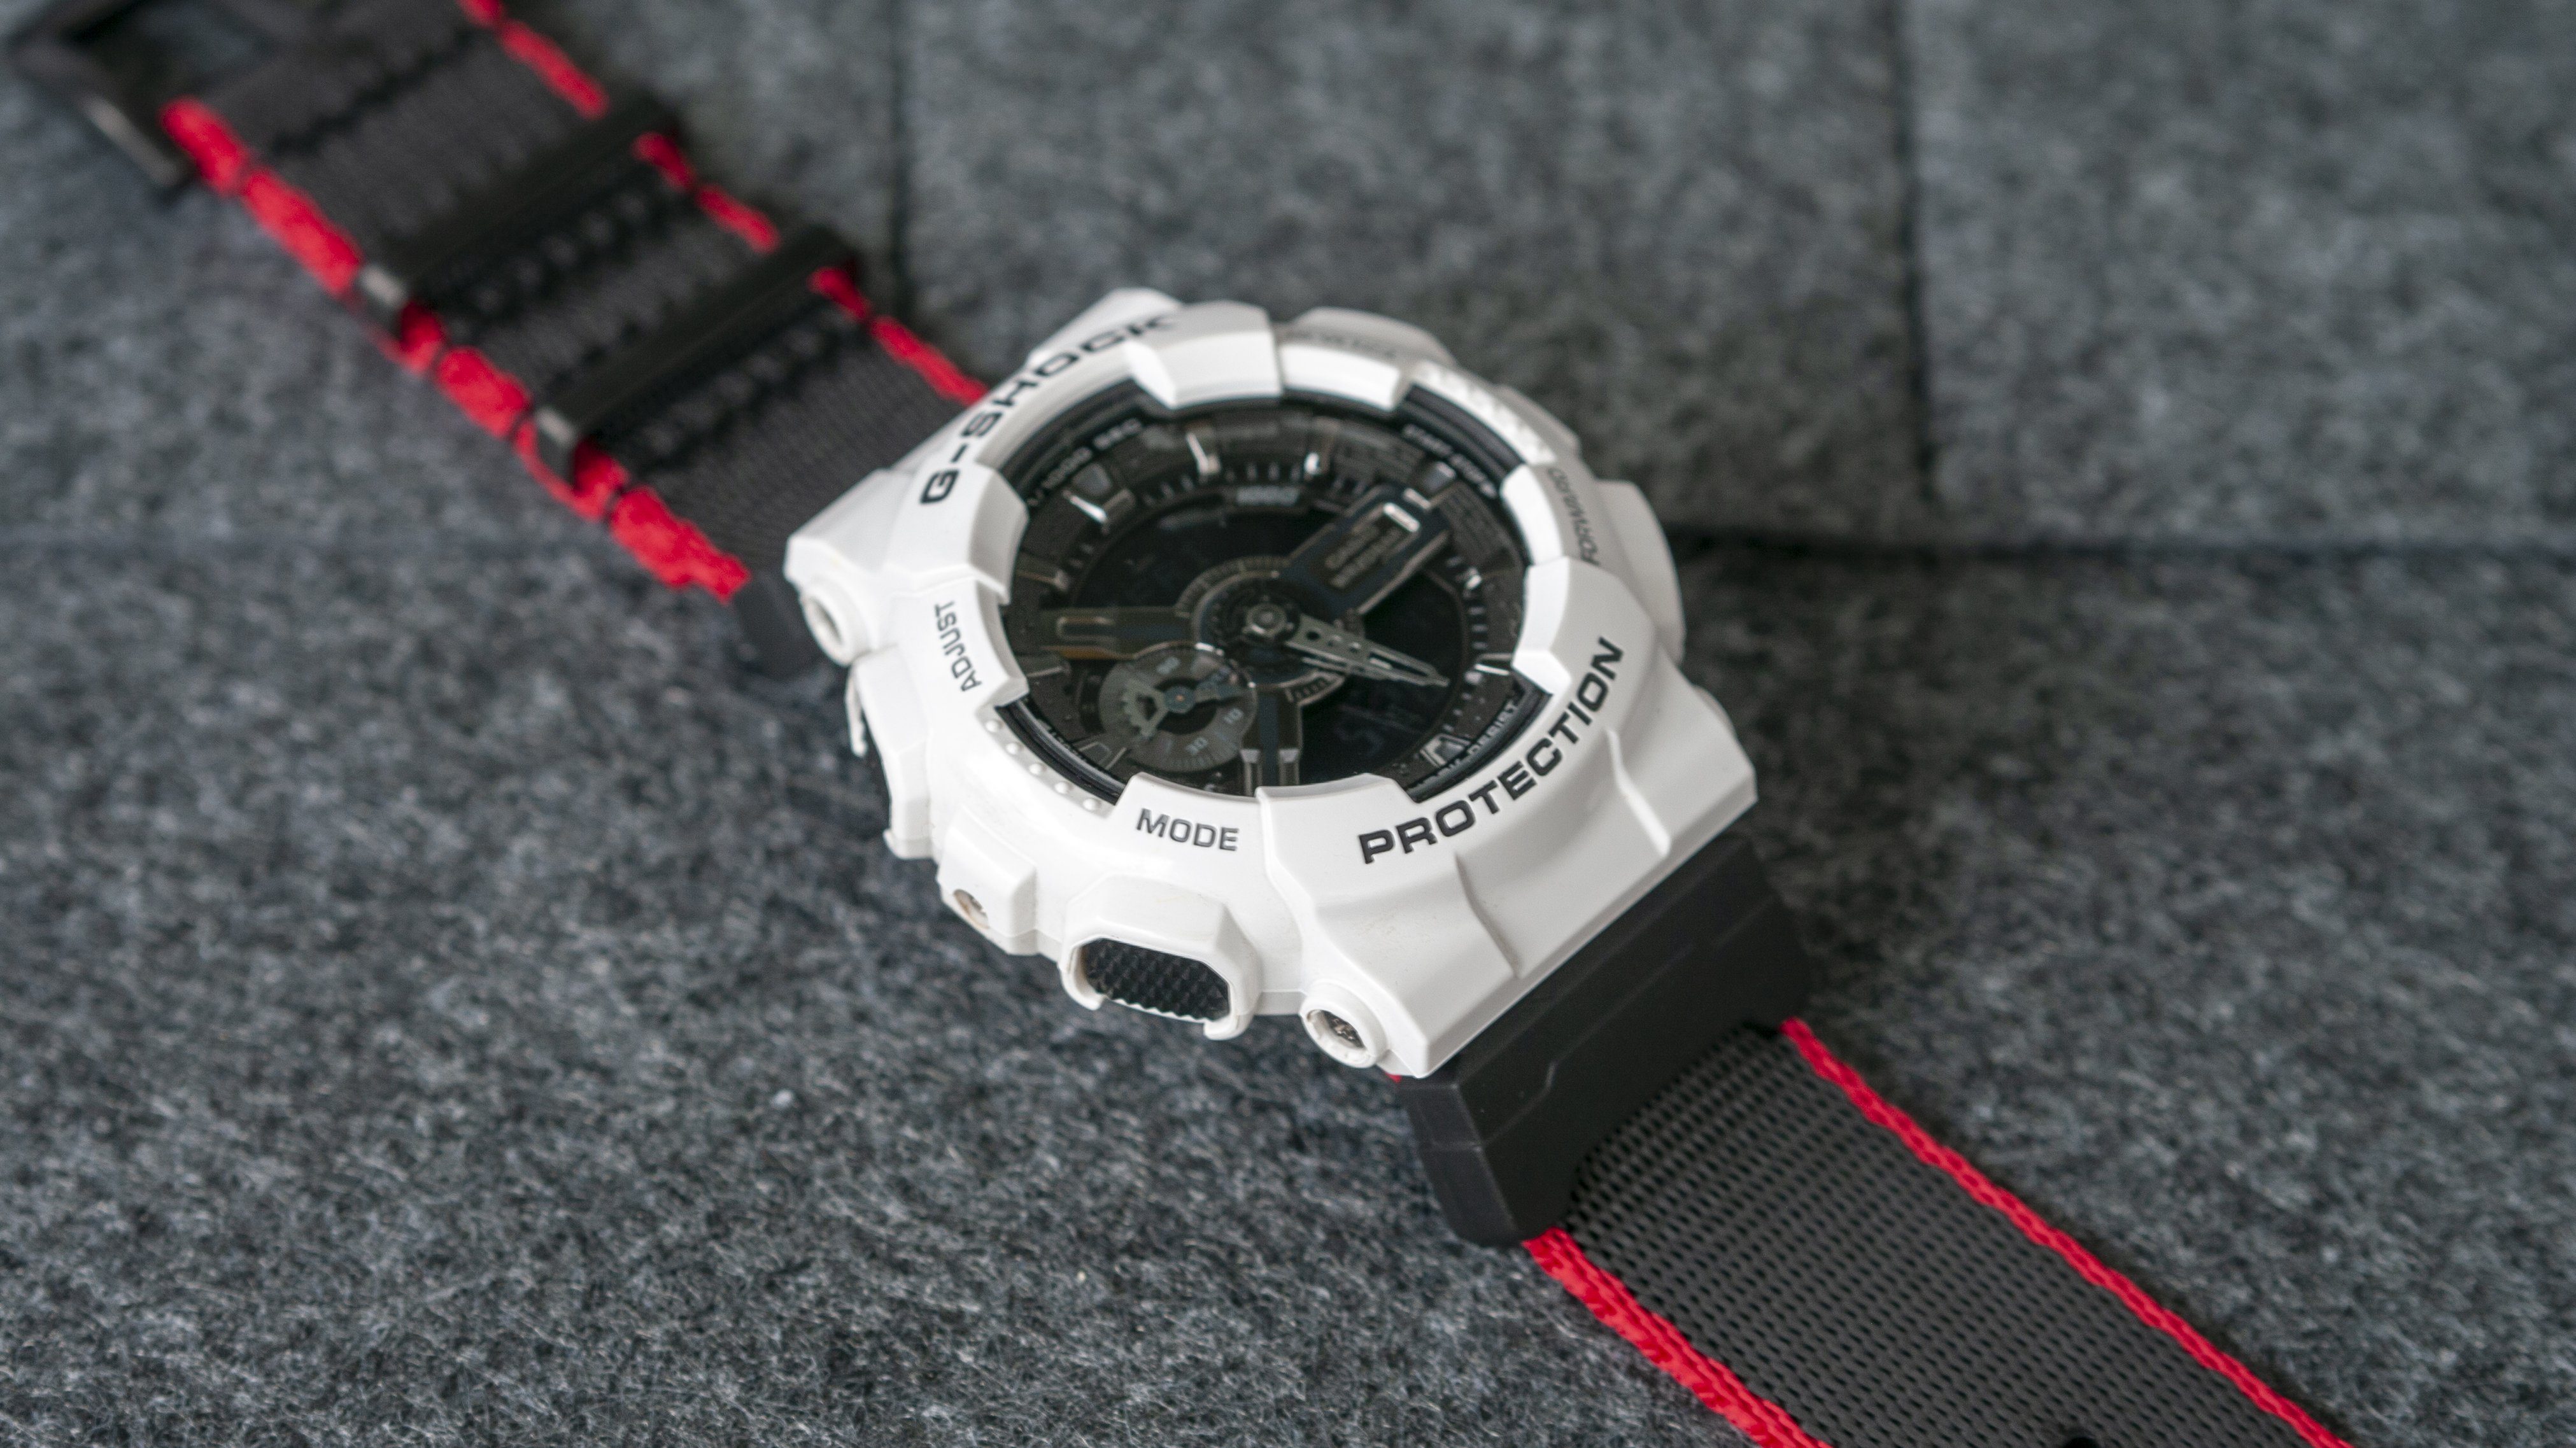 gshock ga110 with seat belt adapter kit red and black